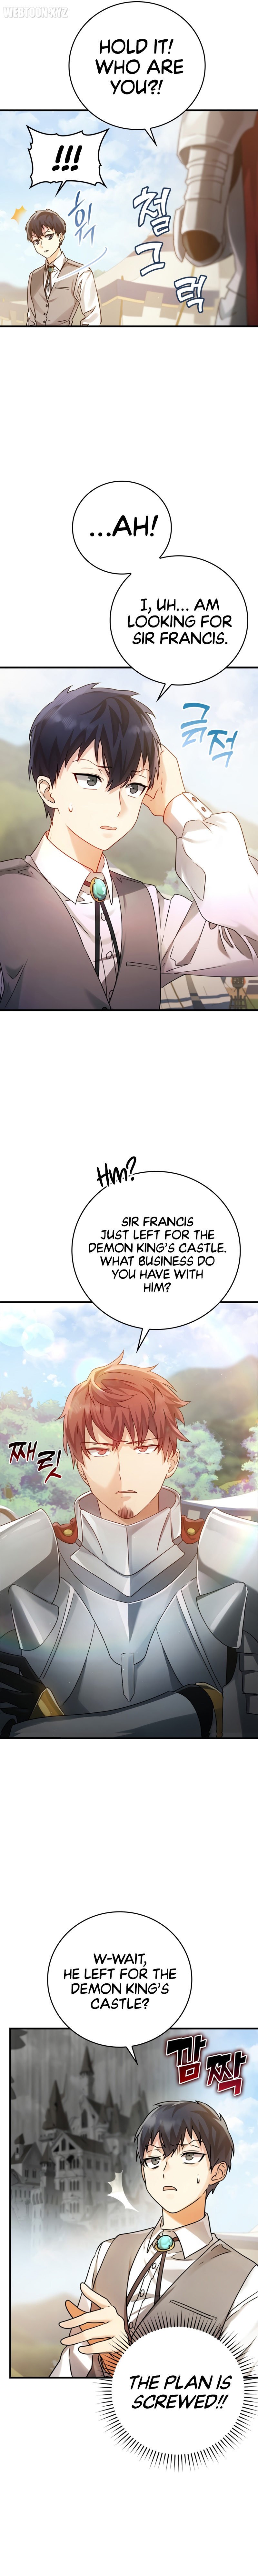 the-demon-prince-goes-to-the-academy-chap-4-7